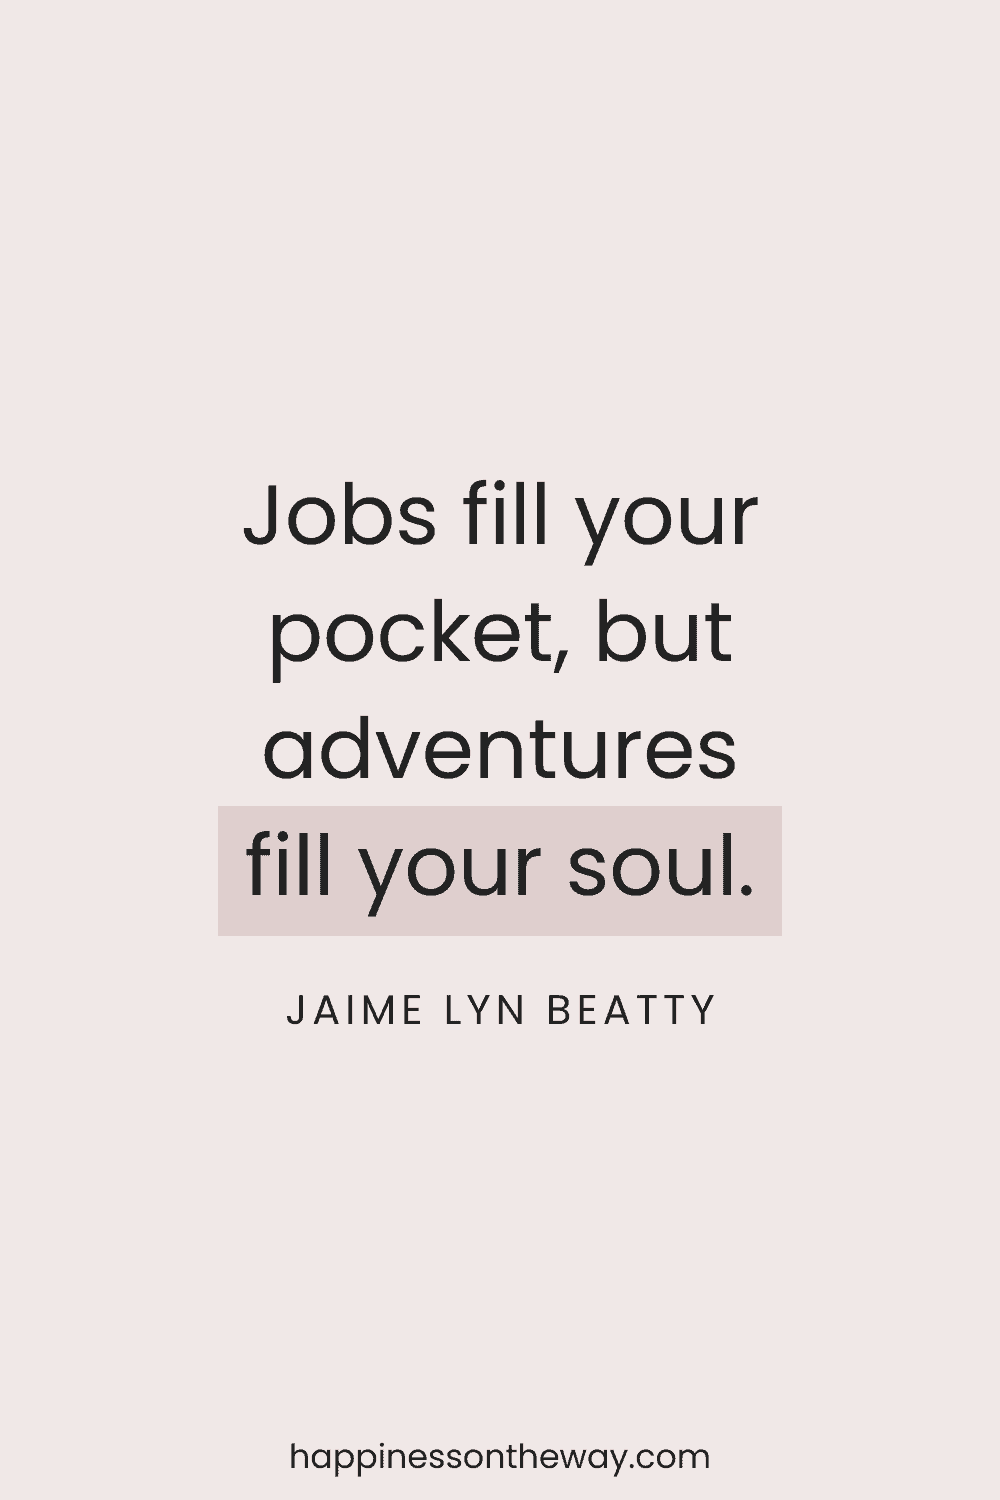 Minimalistic design with the quote 'Jobs fill your pocket, but adventures fill your soul.' by Jaime Lyn Beatty